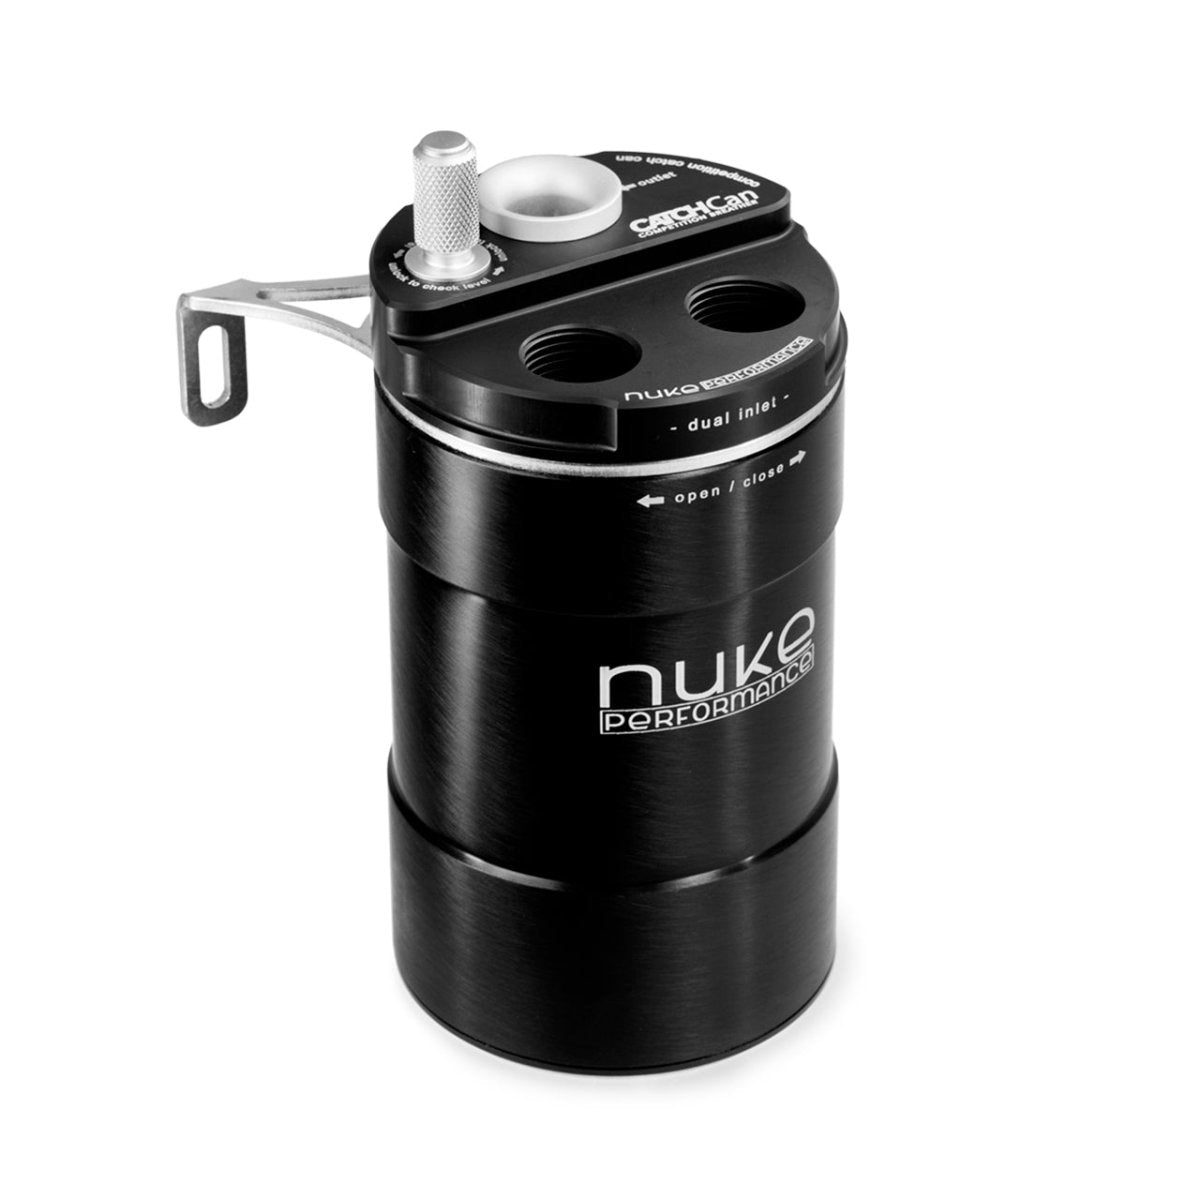 NUKE PERFORMANCE Competition Oil Catchtank 0,5 / 1,0 liter Universal - PARTS33 GmbH